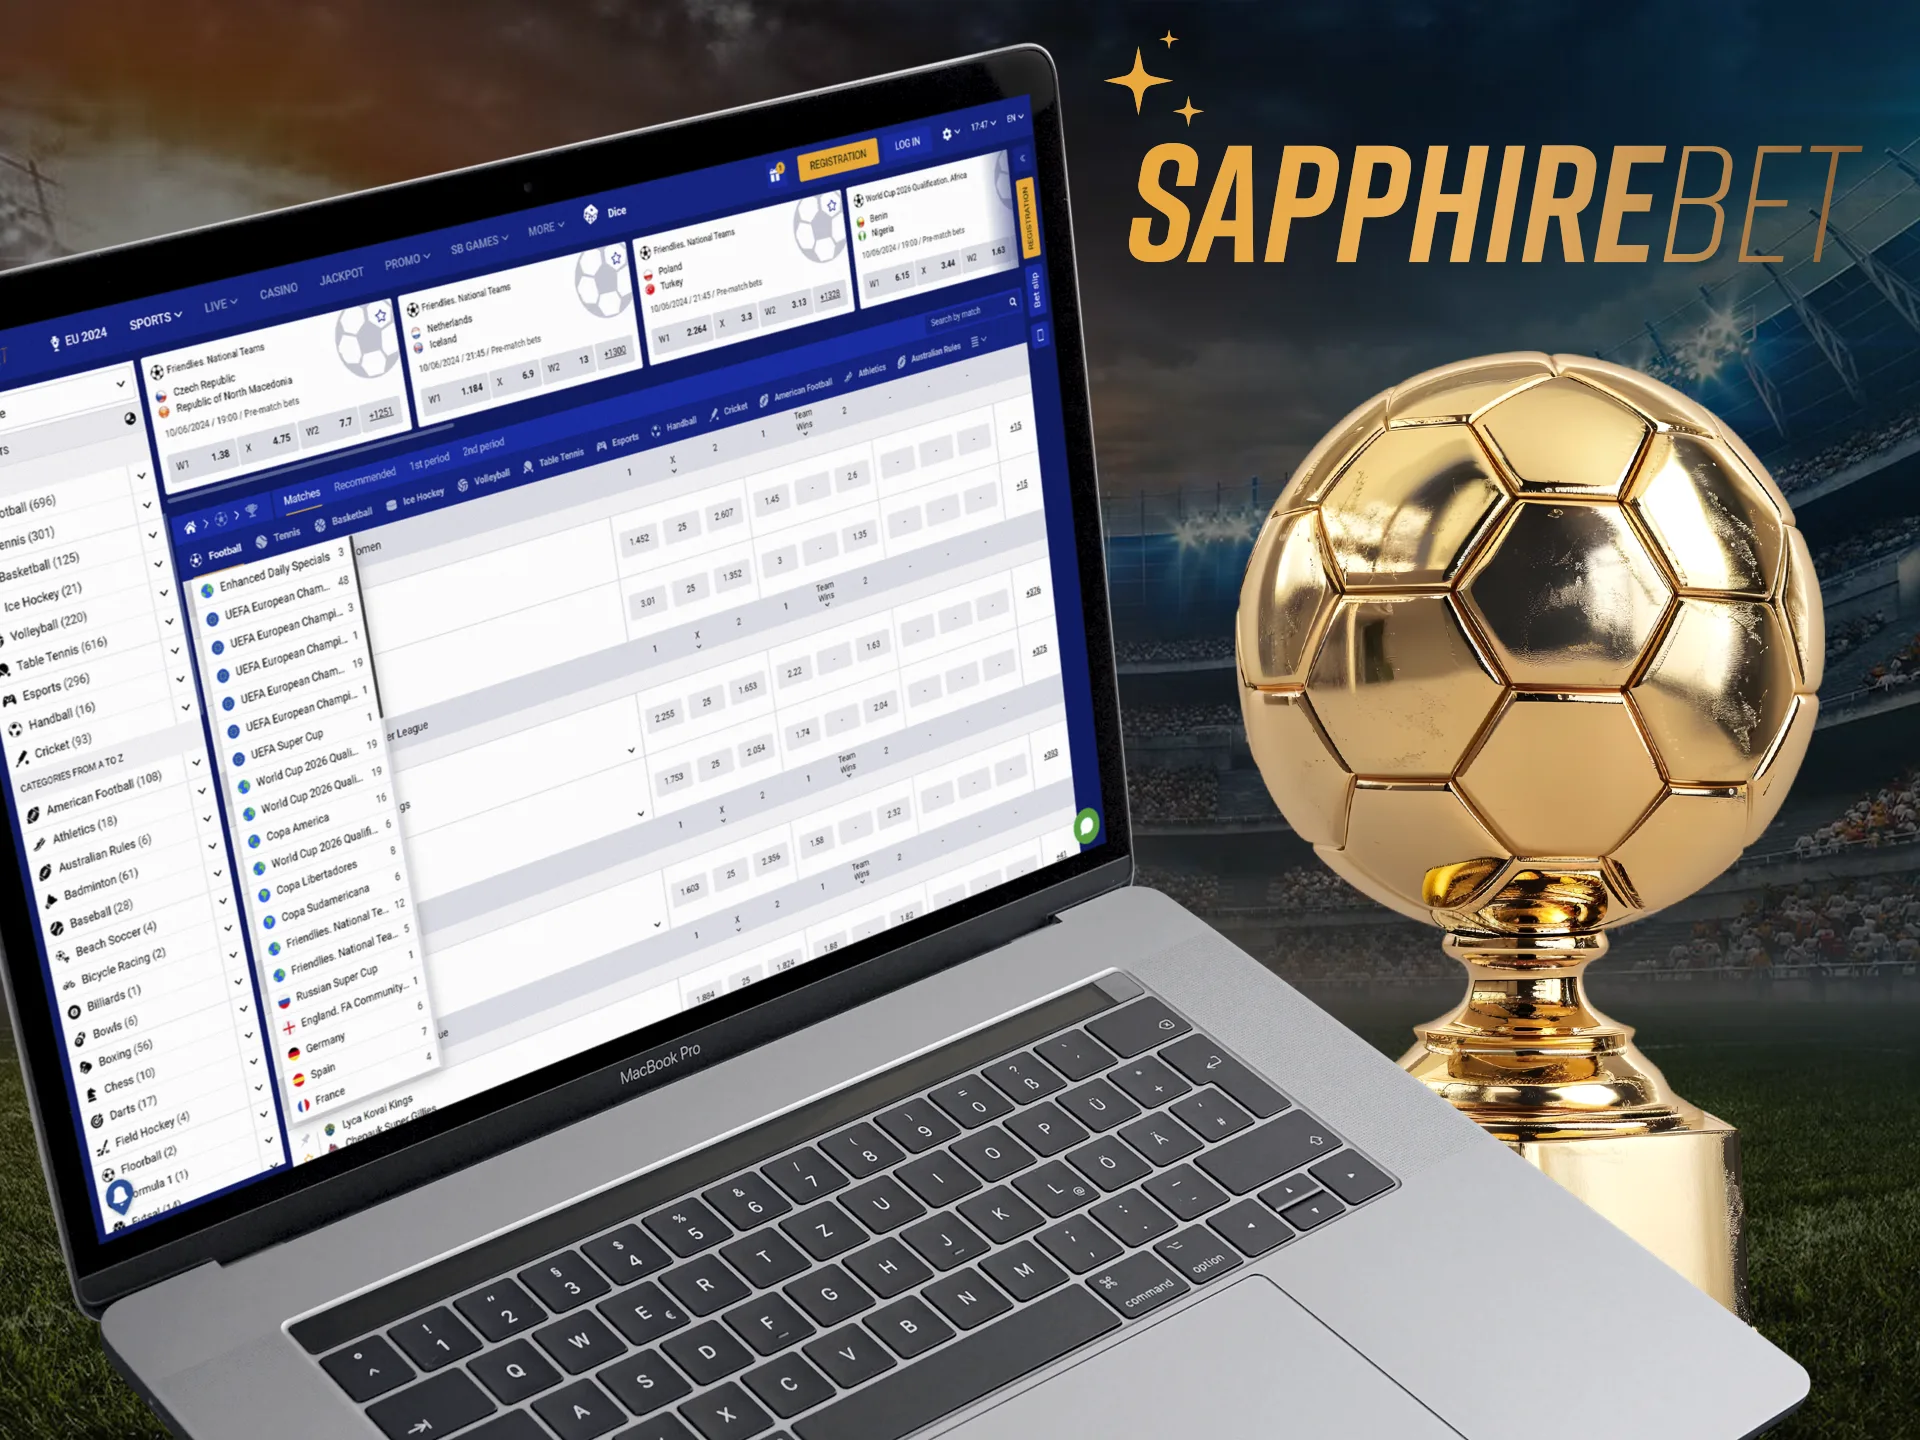 Check out the list of football tournaments available at SapphireBet.